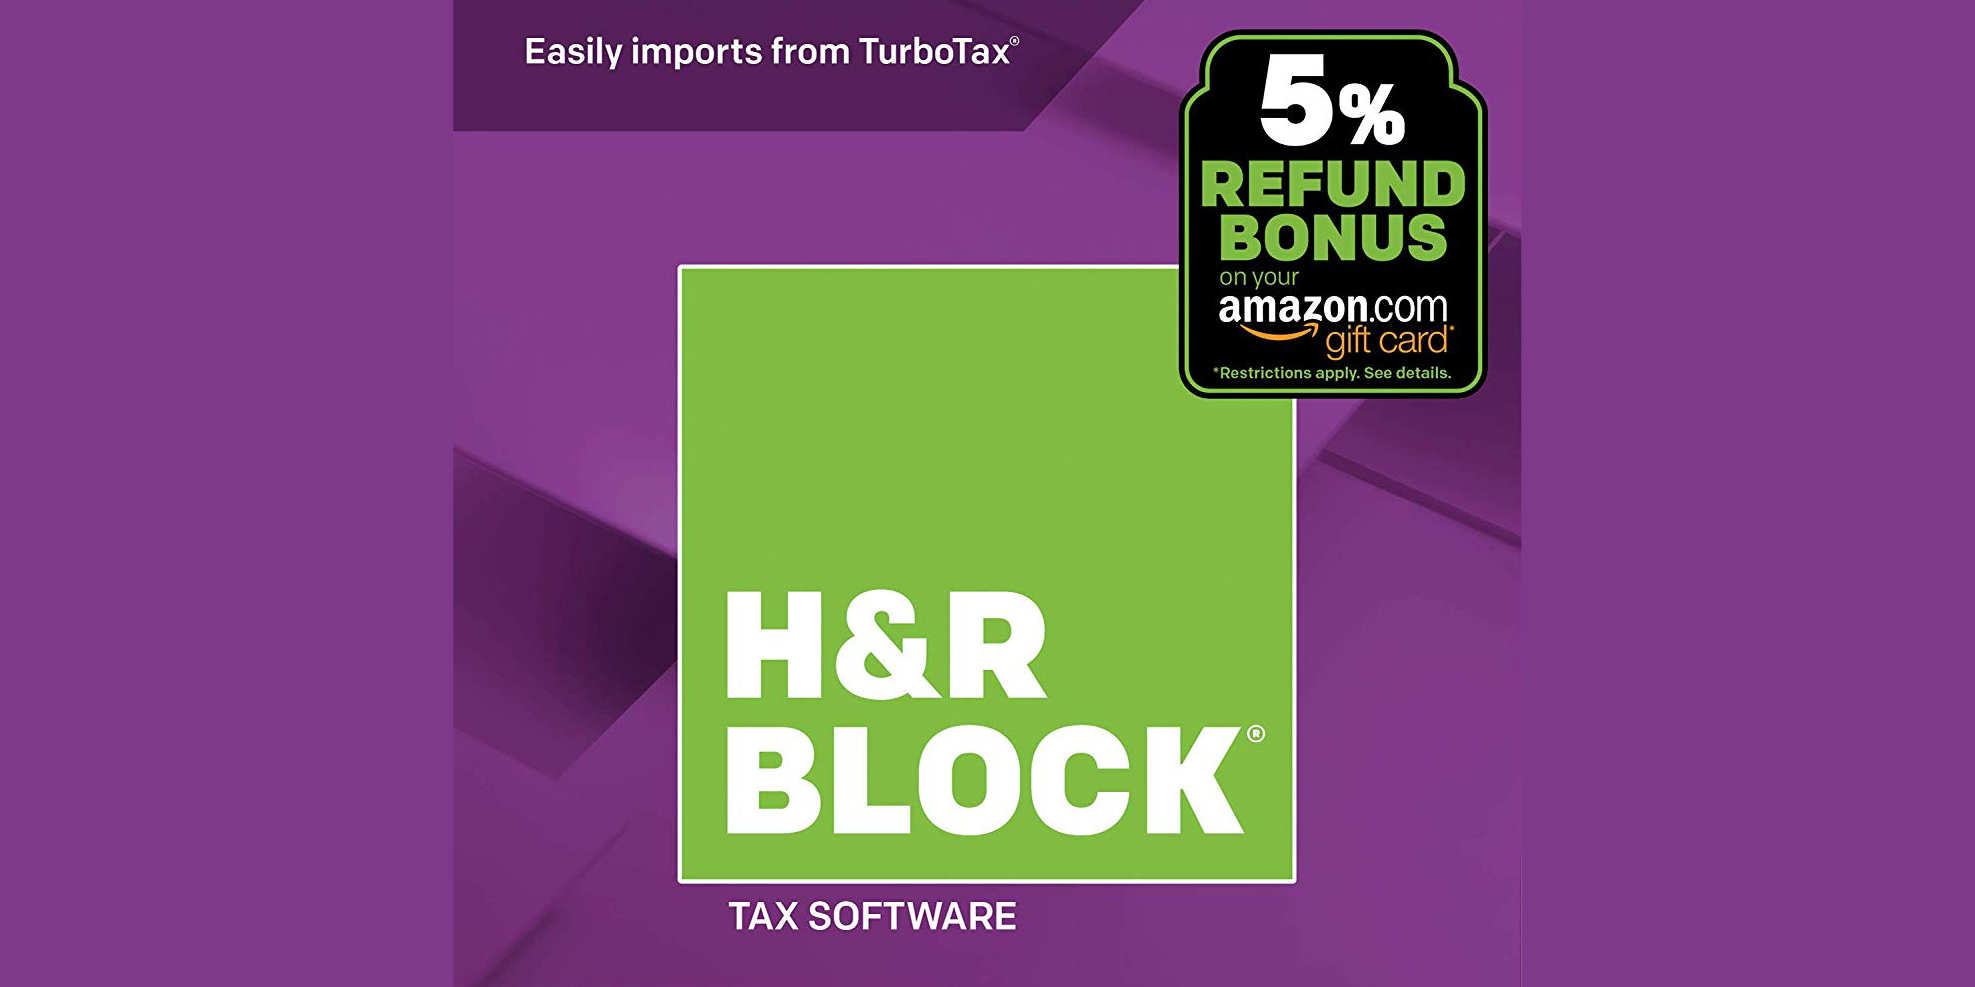 H&R Block Deluxe Tax Software includes a 5 bonus on your return, now